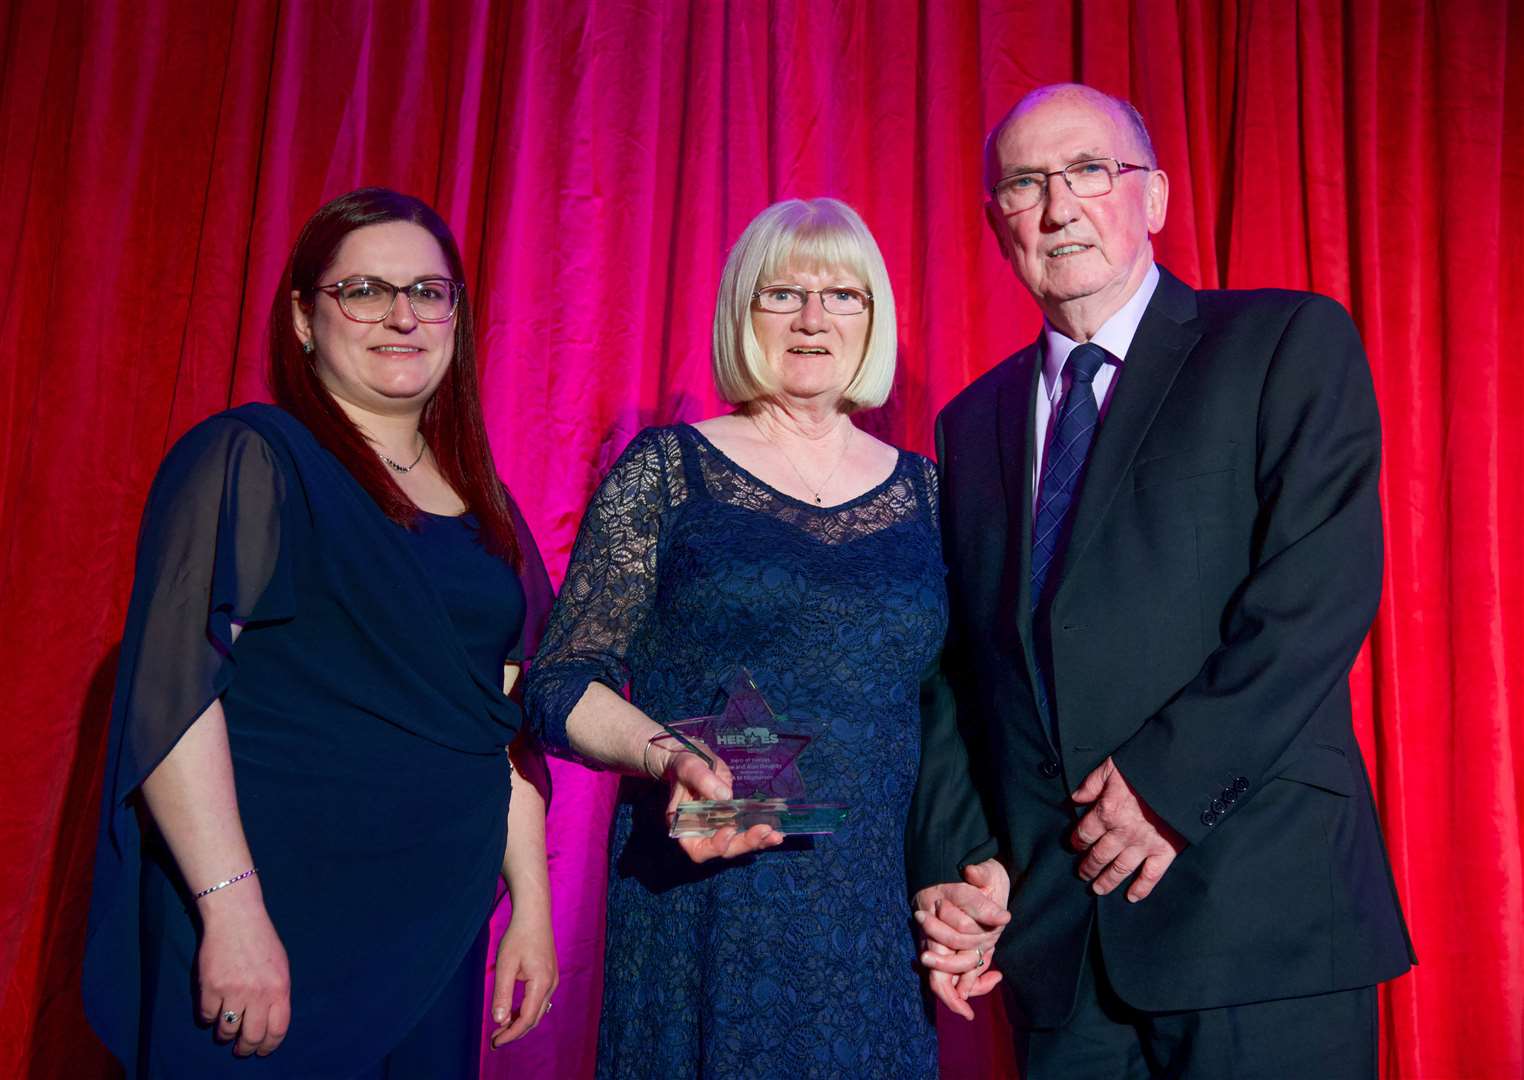 Anne and Alan Doughty won the Carer of the Year award.